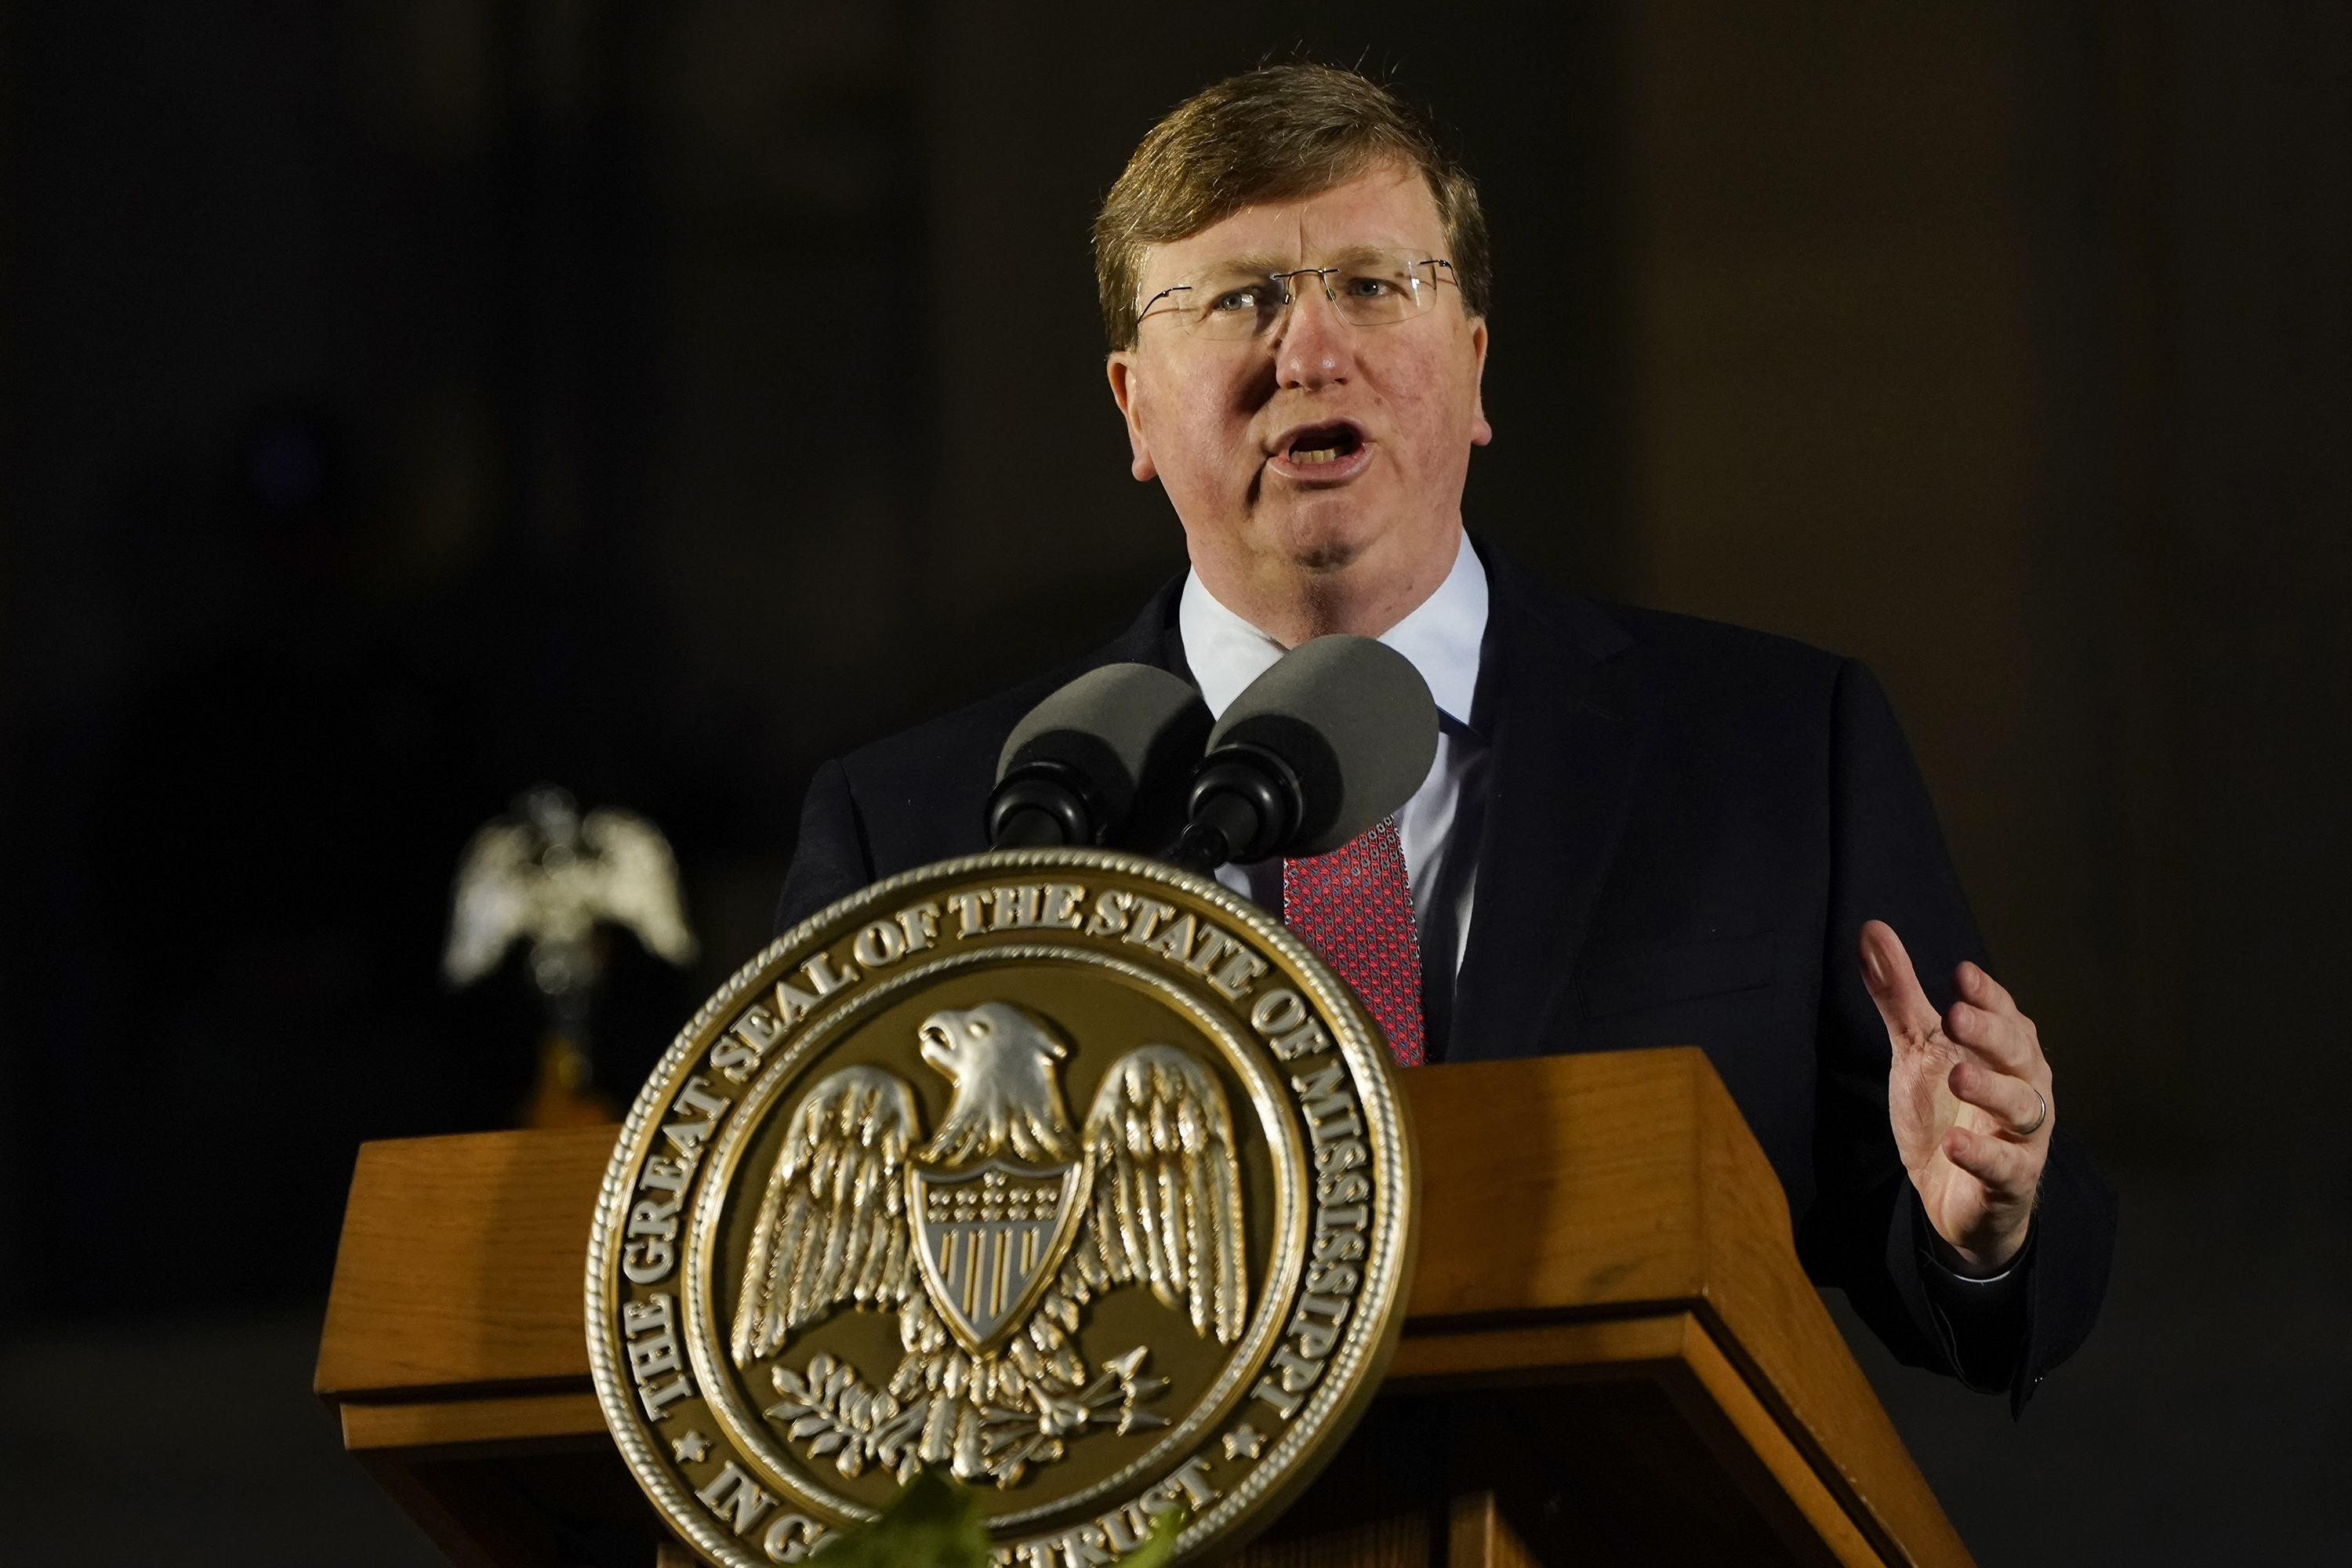 Republican Gov. Tate Reeves delivers his State of the Union address before the joint session of the Mississippi Legislature on the steps of the State Capitol in Jackson, Mississippi, on Jan. 30.